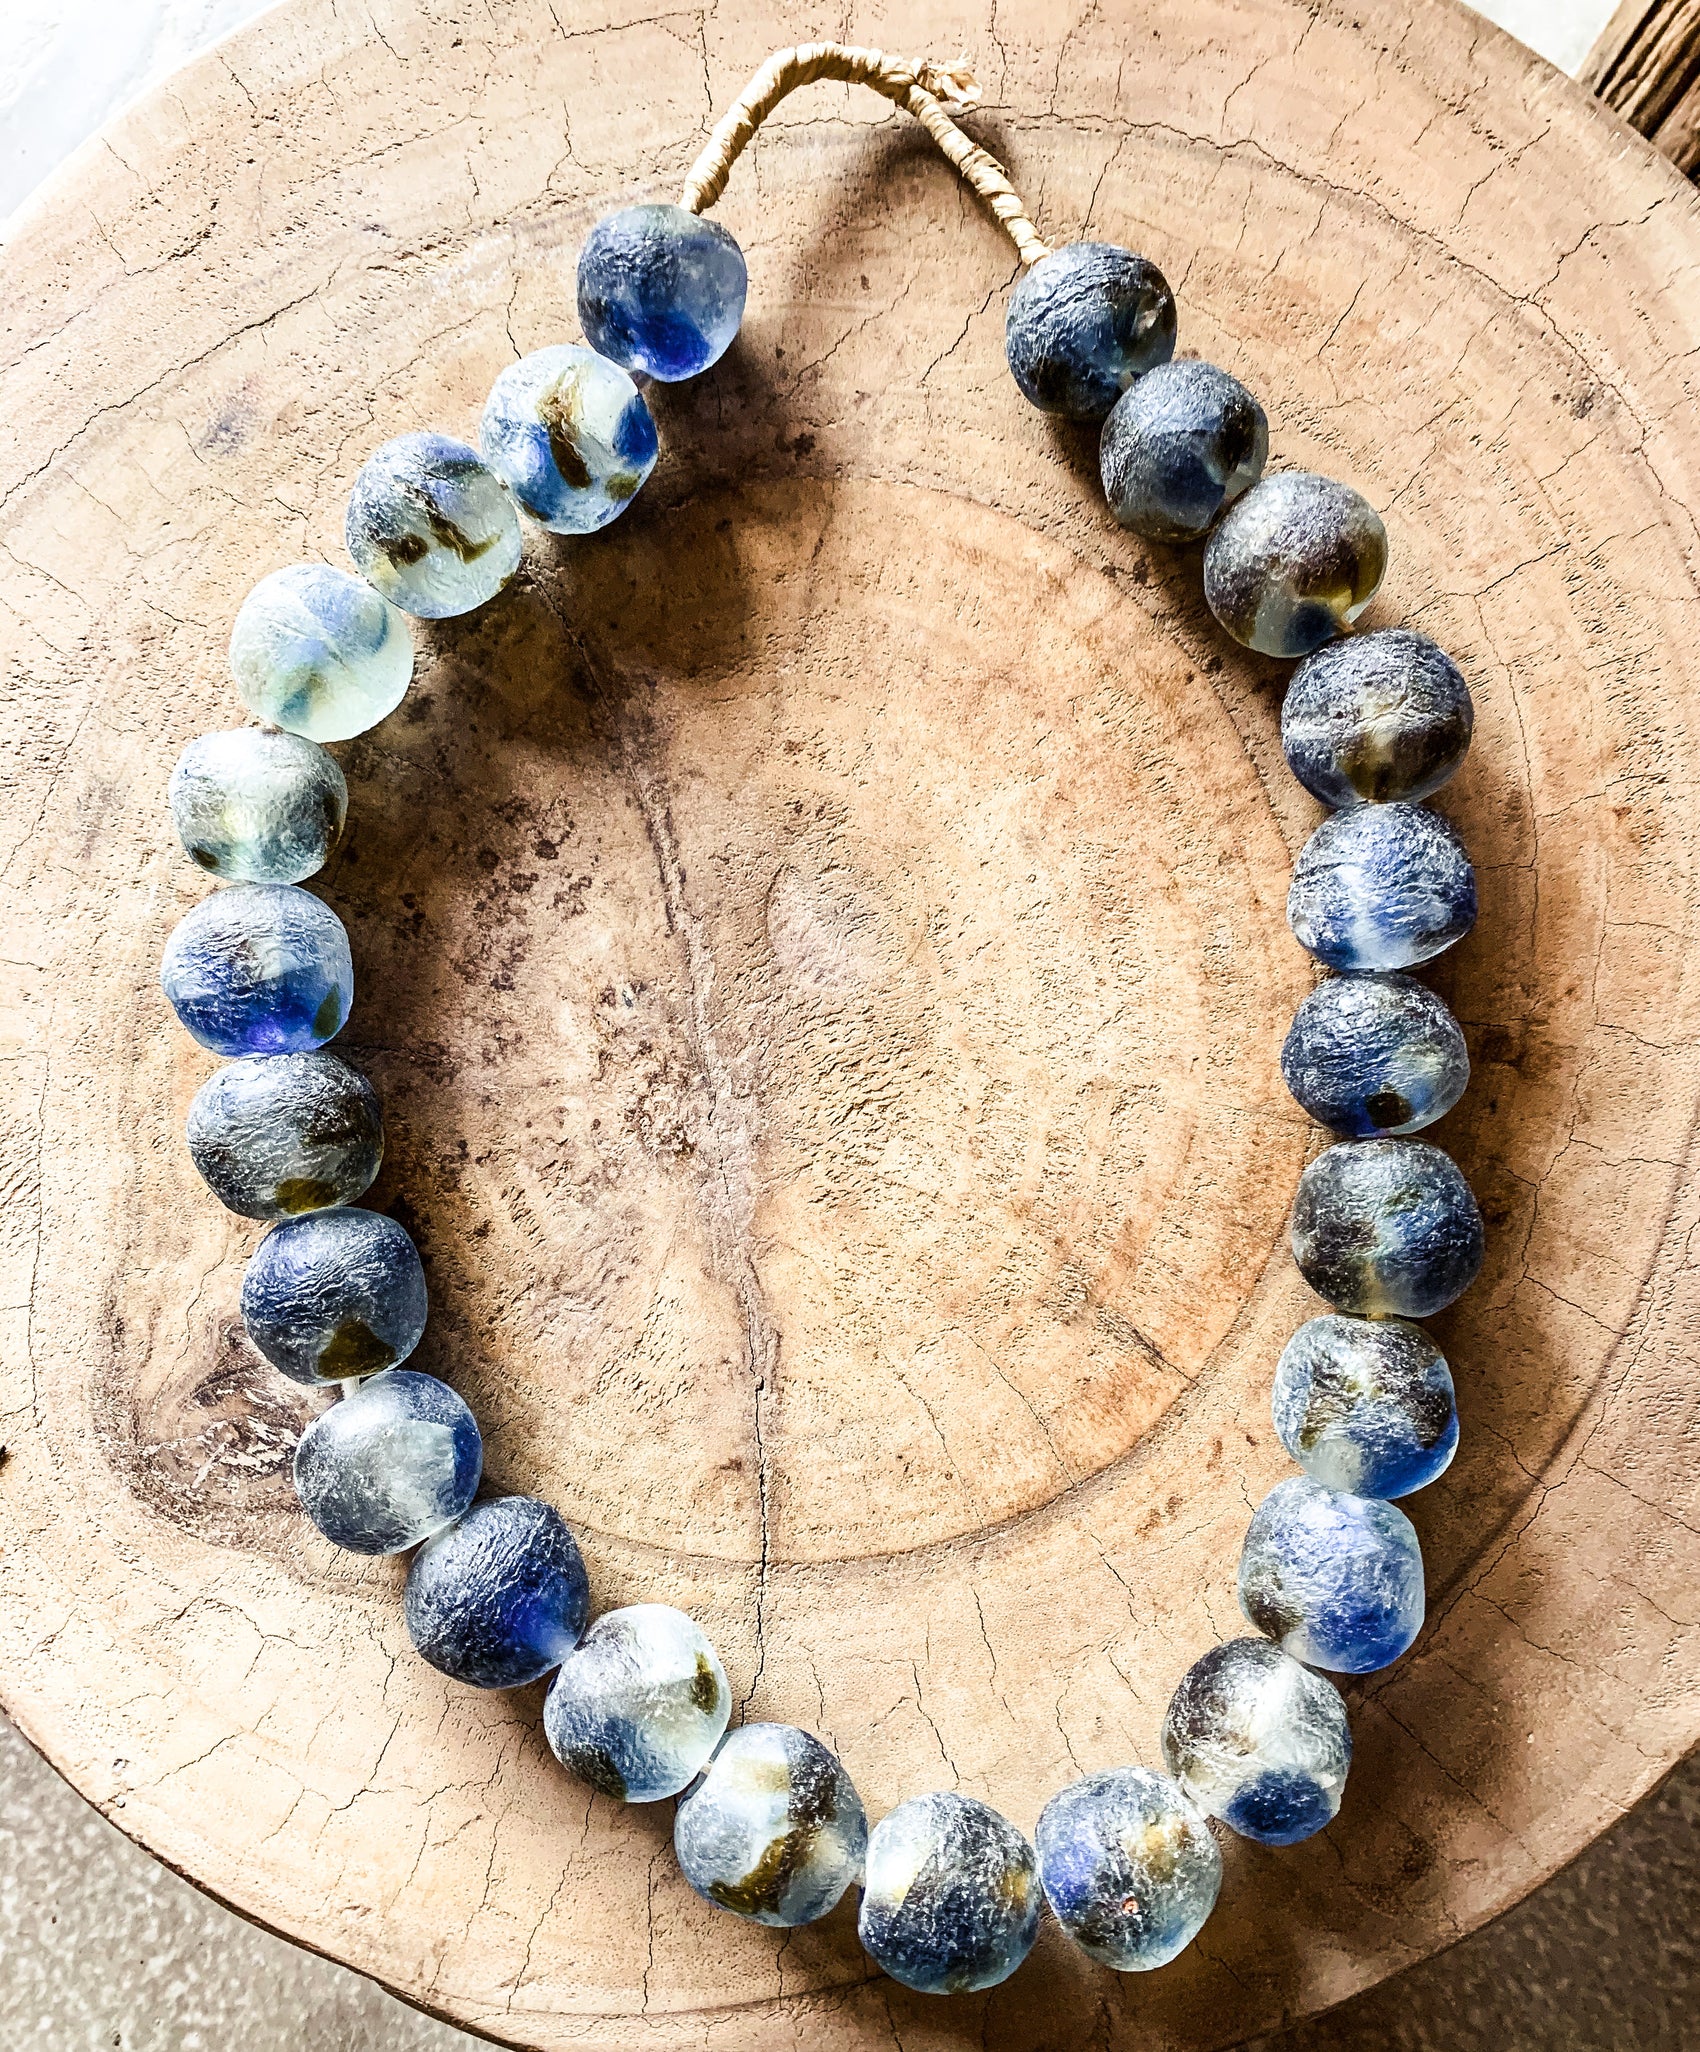 Necklace of recycled glass beads blue-brown or light green